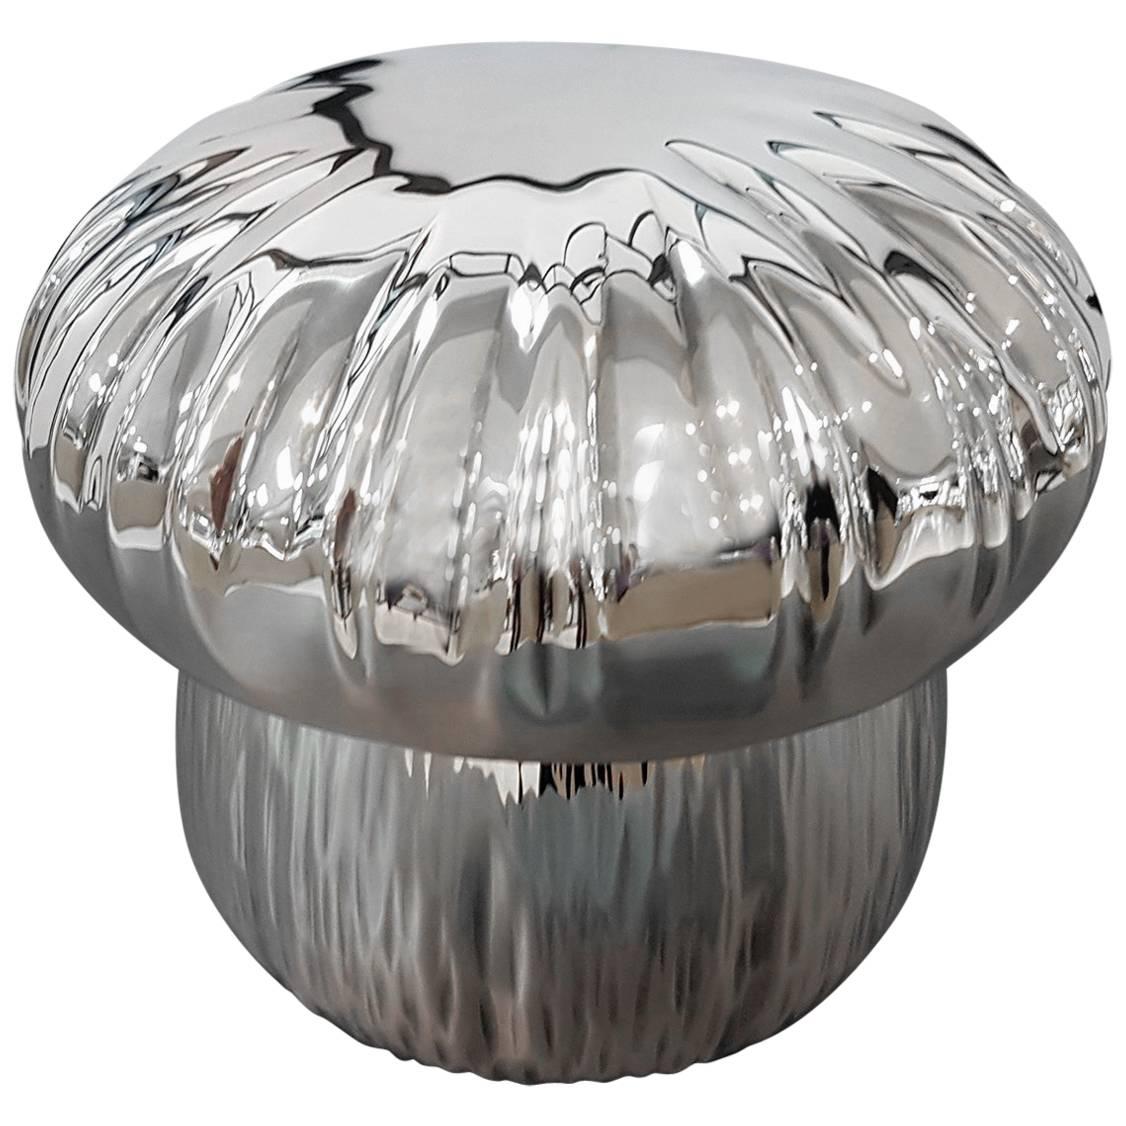 20th Century Italian Mushroom shape Silver Box. Enbossed and chiselled by hand